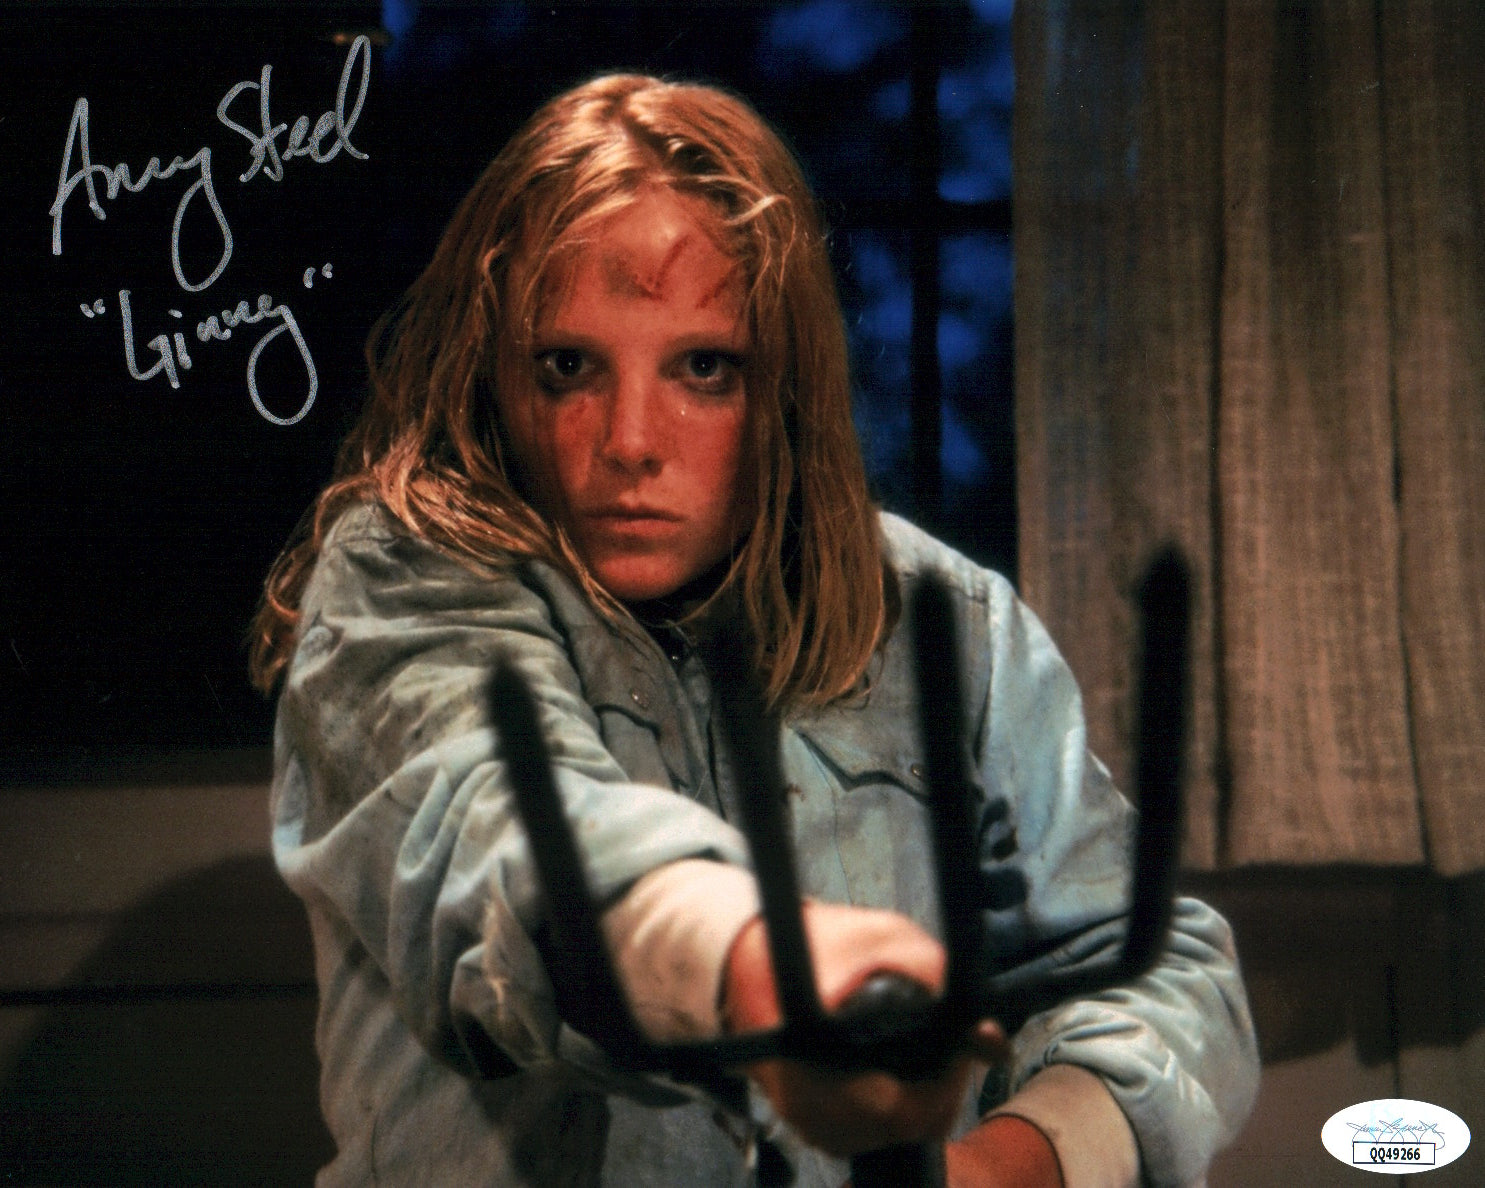 Amy Steel Friday the 13th Part 2 8x10 Photo Signed Autograph JSA Certified COA